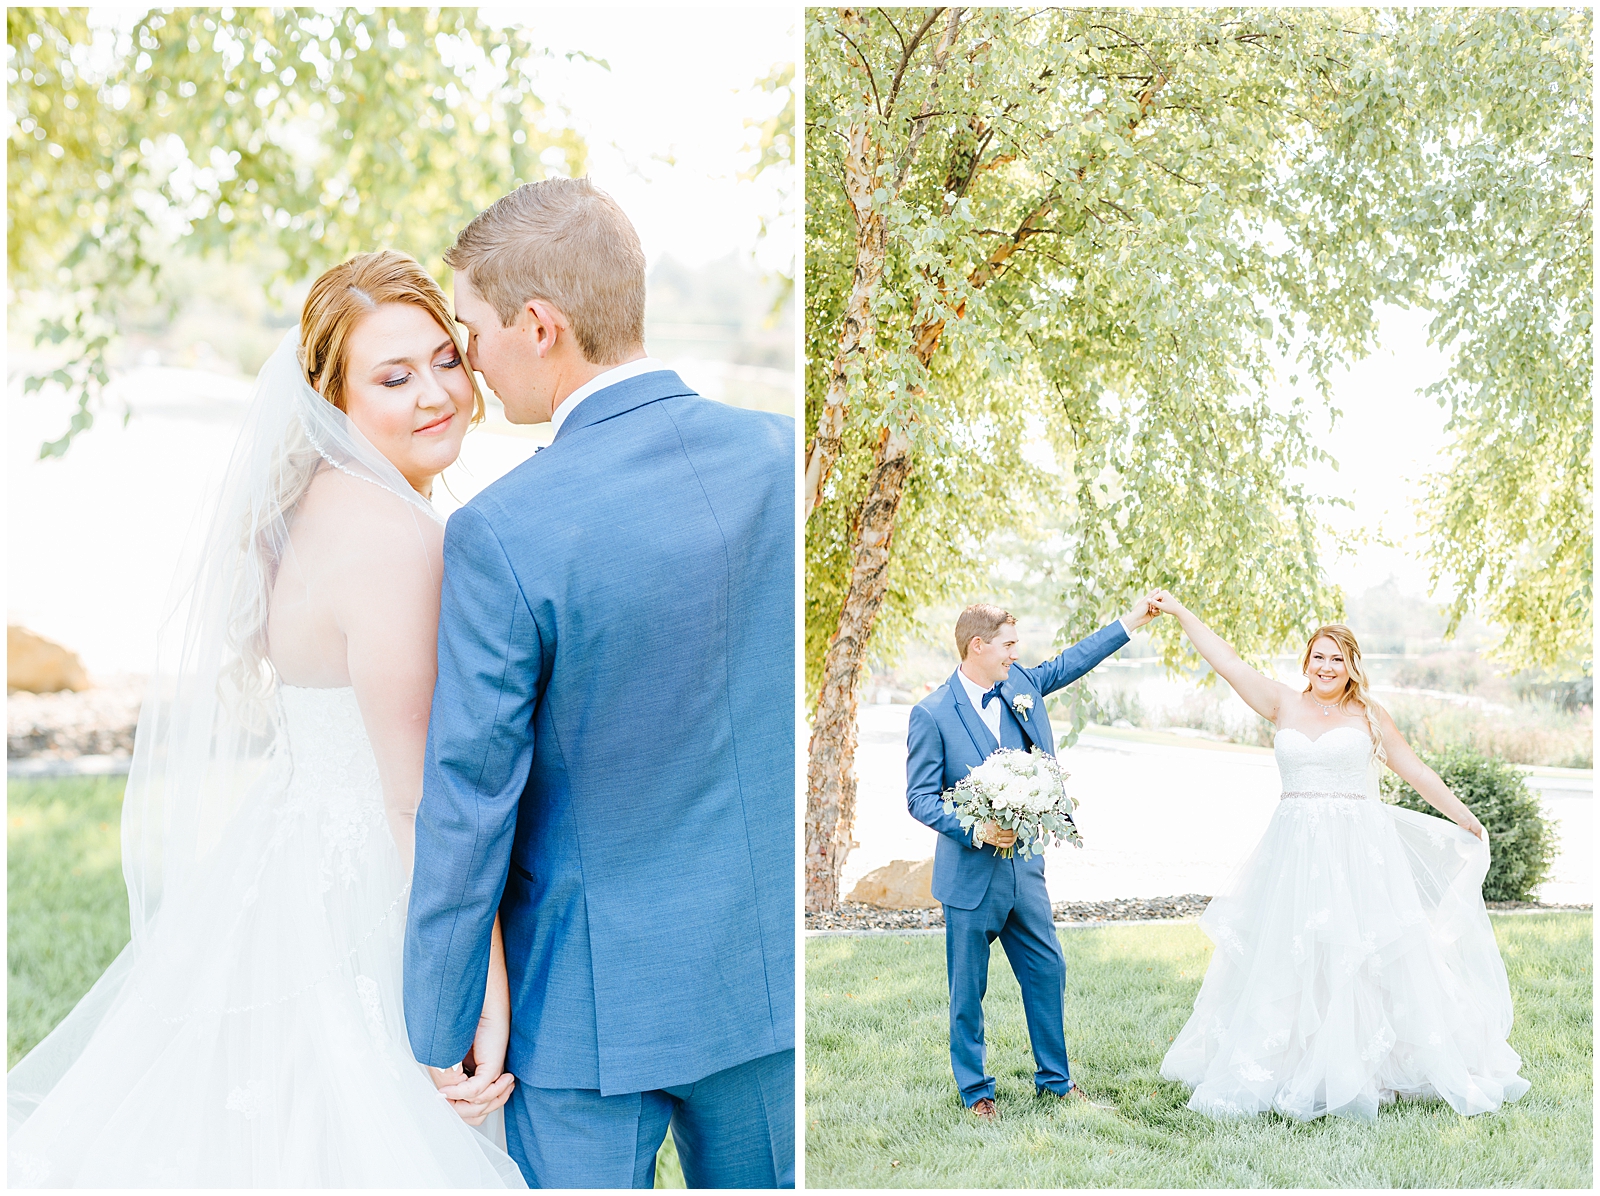 Bride and Groom Portraits at A Creekside Affair Wedding and Event Center